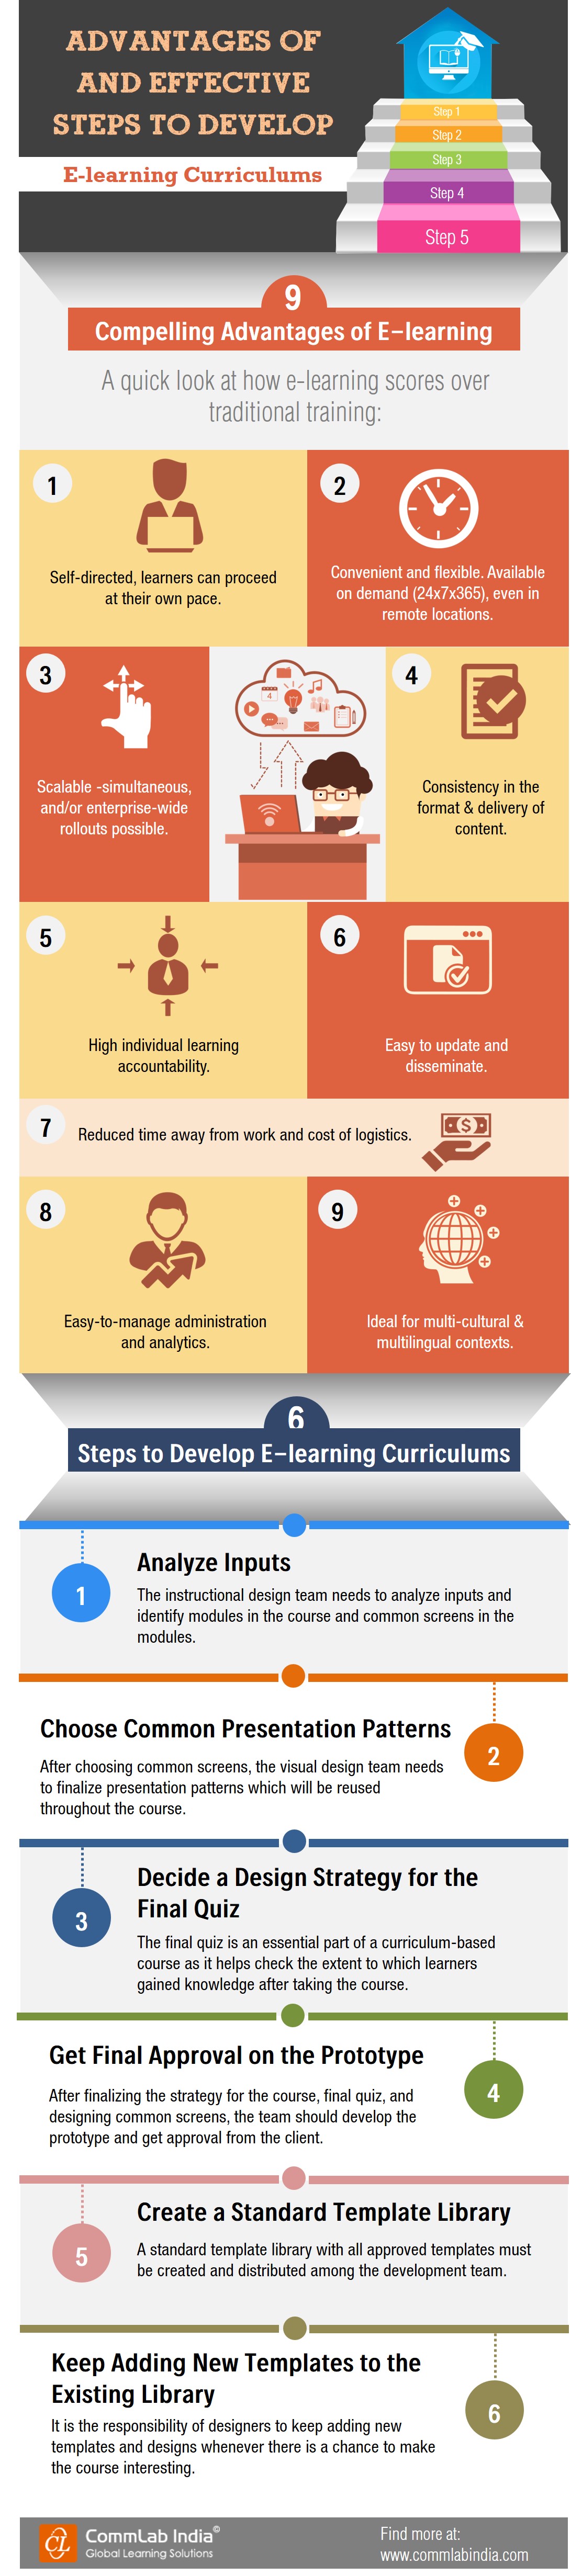 Advantages of and Effective Steps to Develop E-learning Curriculums[Infographic]